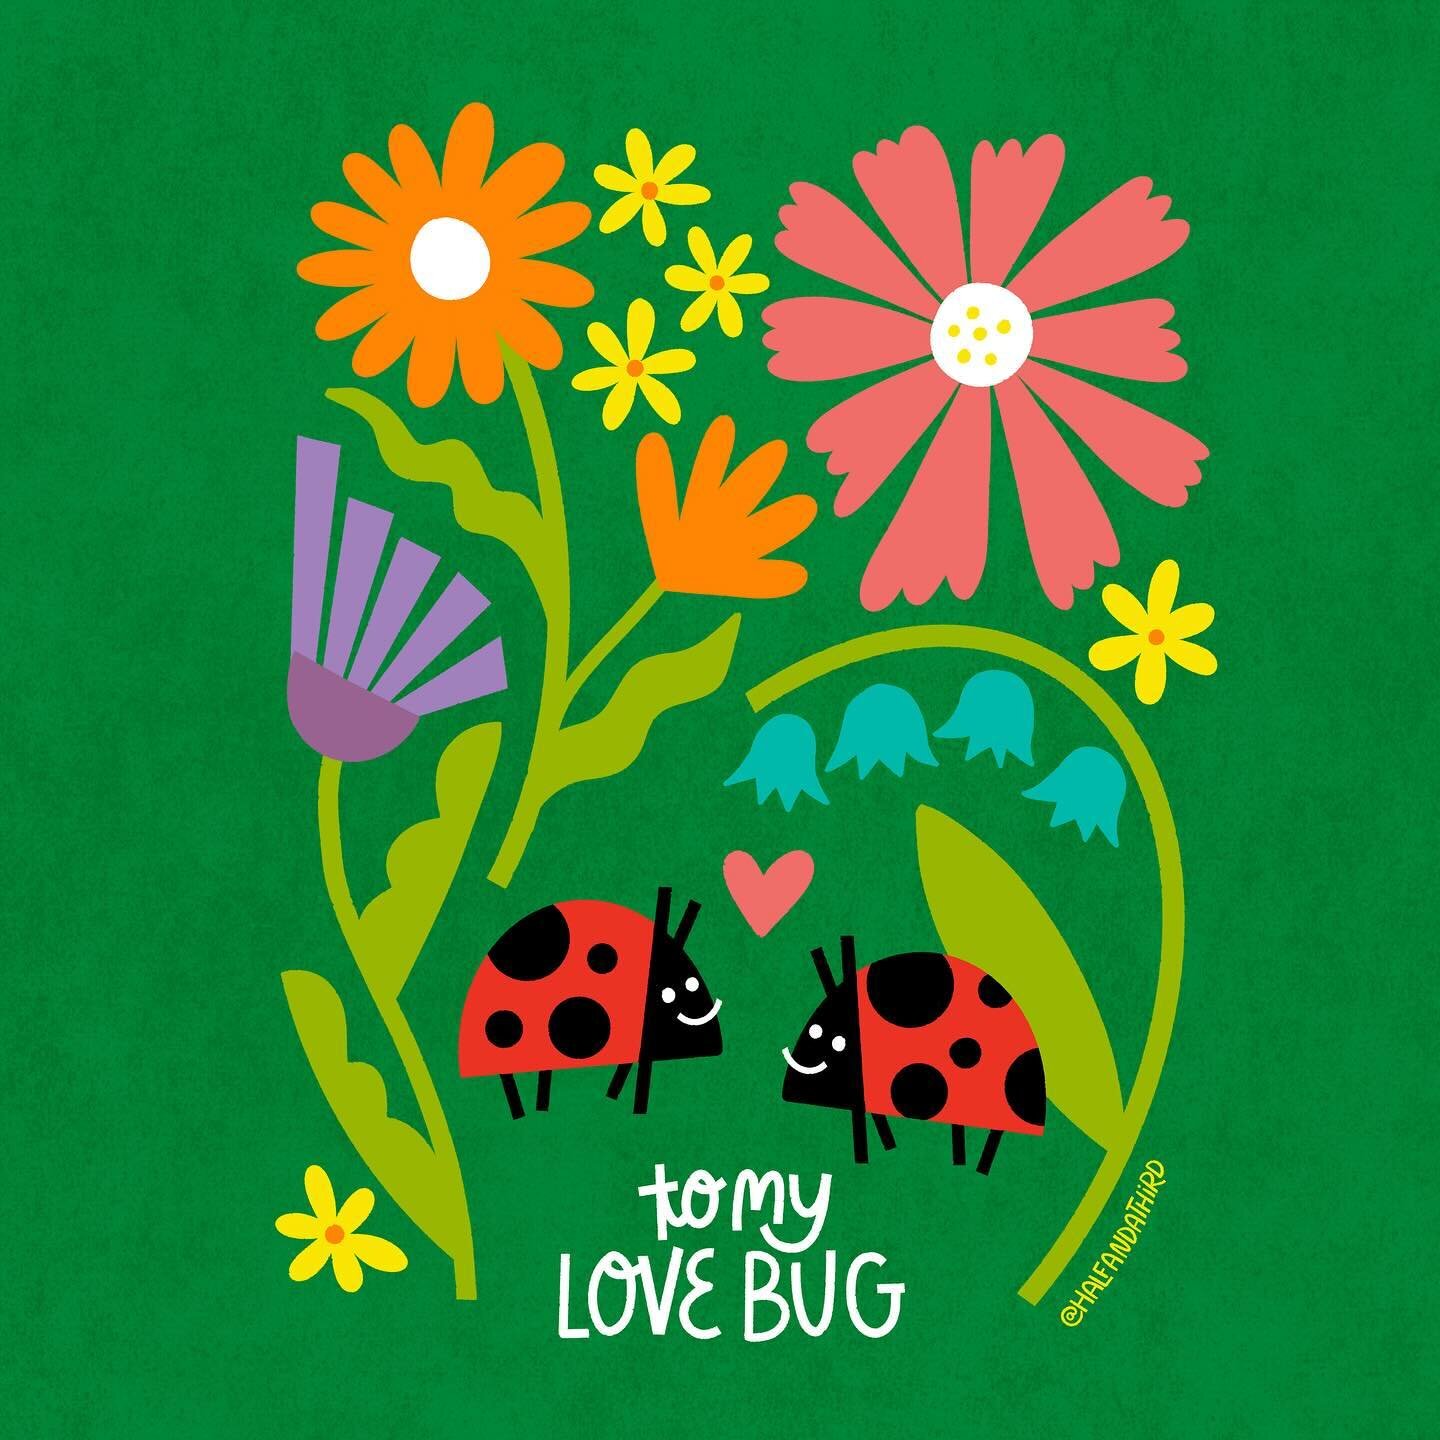 Busy Bugs
These little love bugs are about to get BUSY 😳🥰
My head is still in Valentine&rsquo;s mode, so for the #sweetspring2024 I wanted to draw some cute ladybugs nestled in their flower paradise. 

P.S. You can find these happy little love bugs